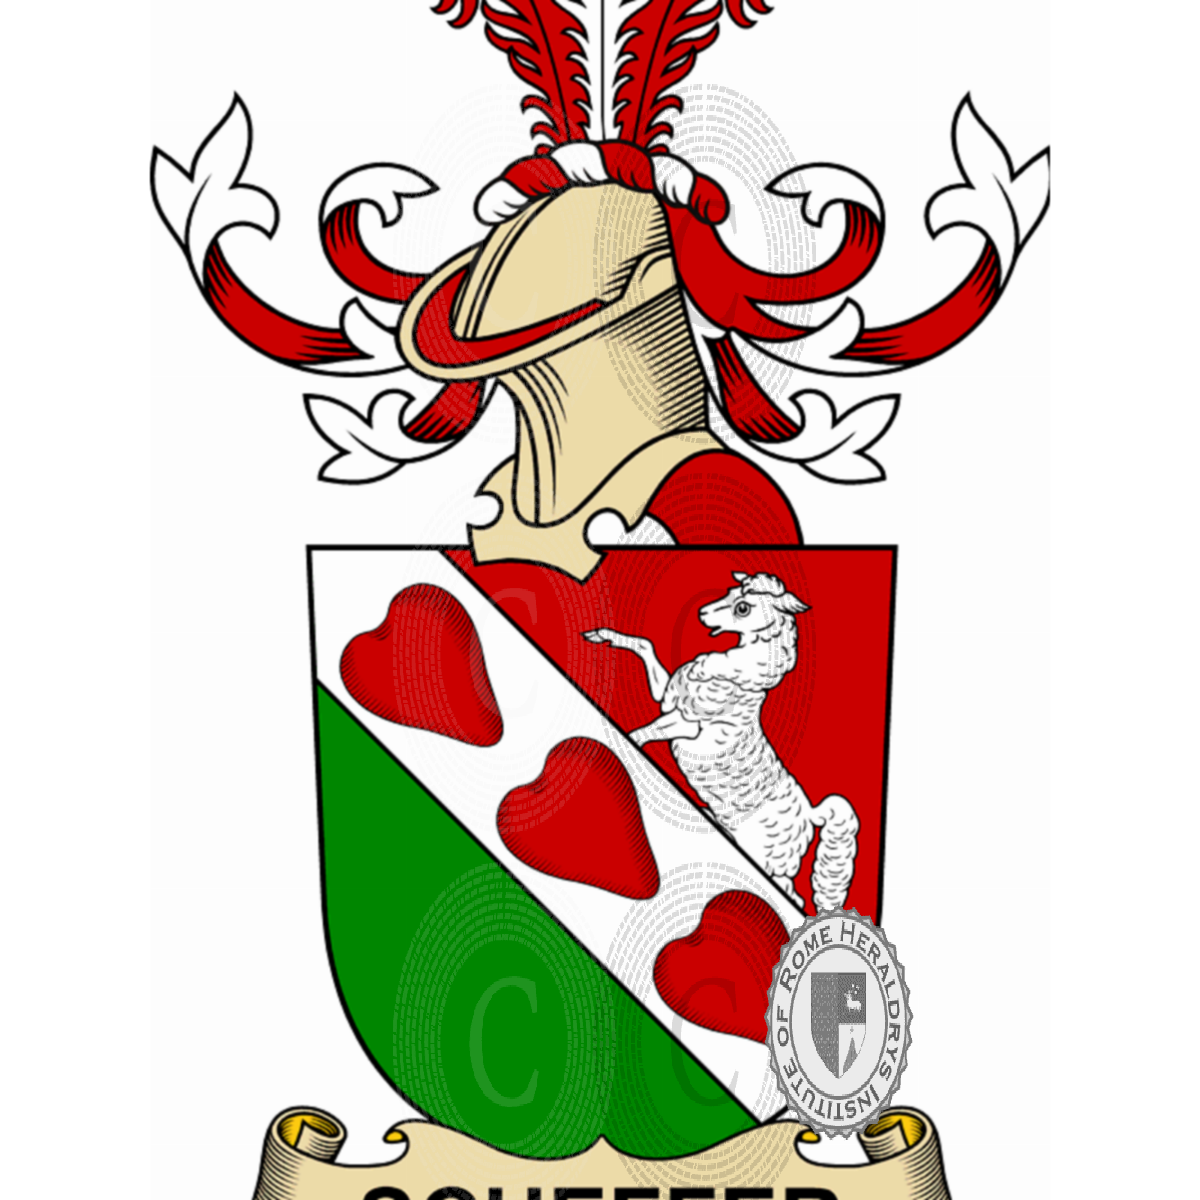 Coat of arms of familyScheffer